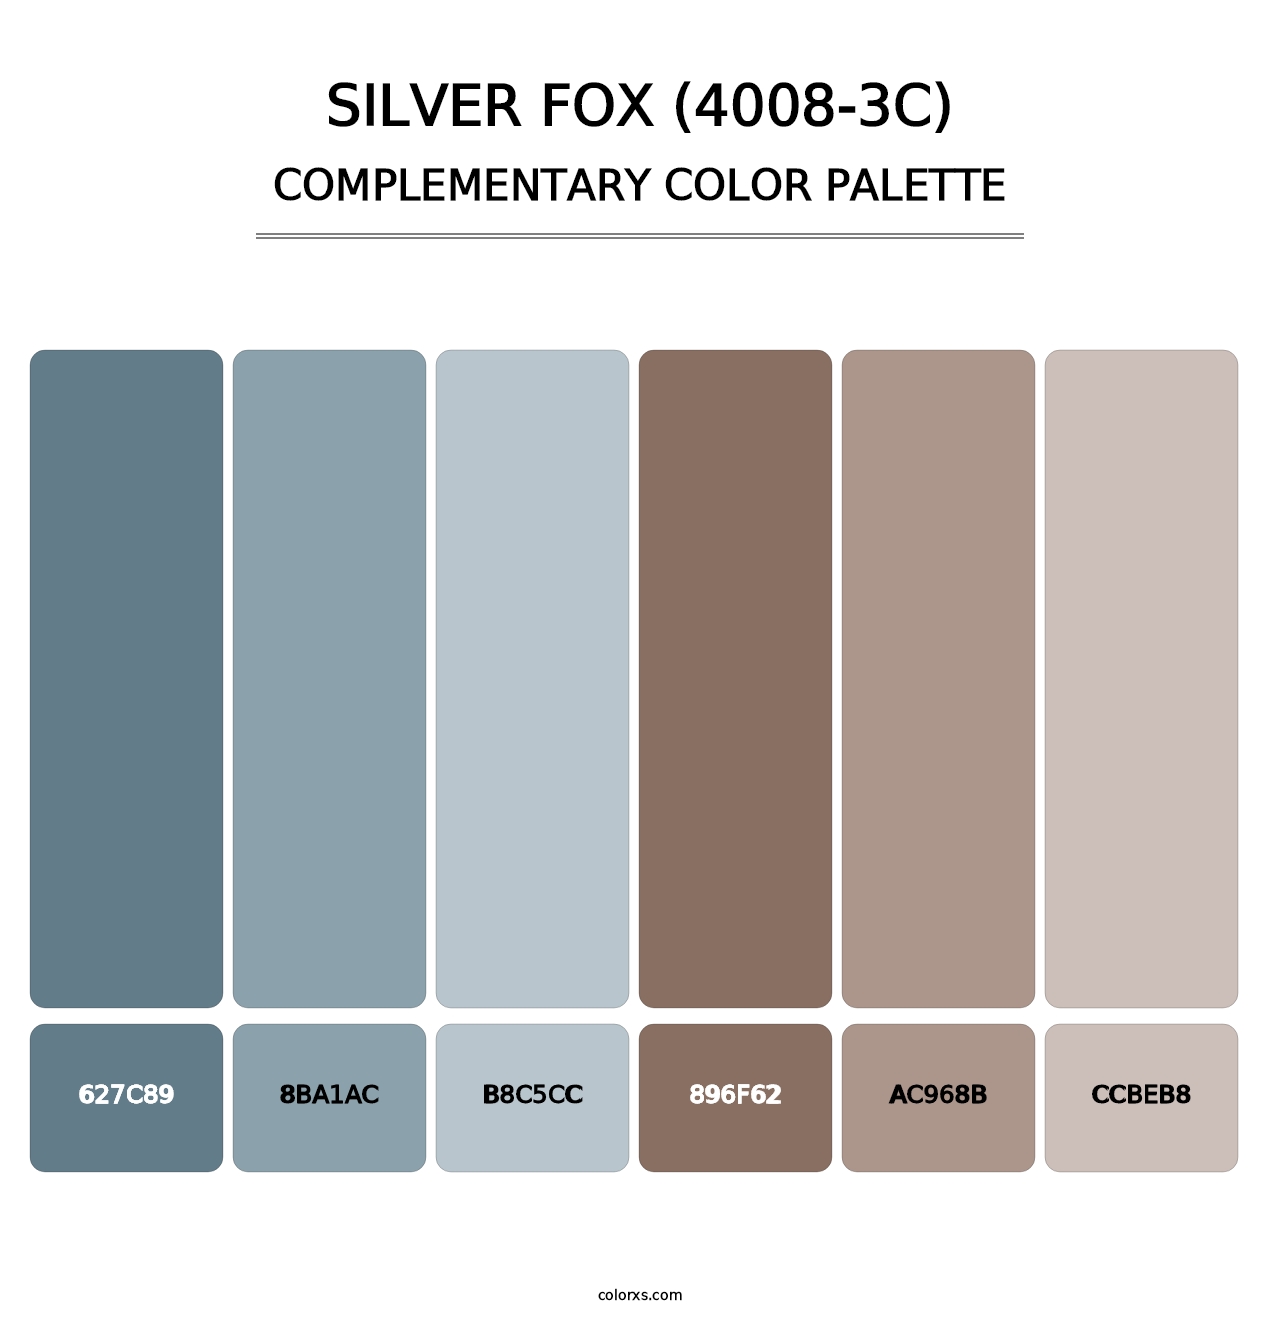 Silver Fox (4008-3C) - Complementary Color Palette